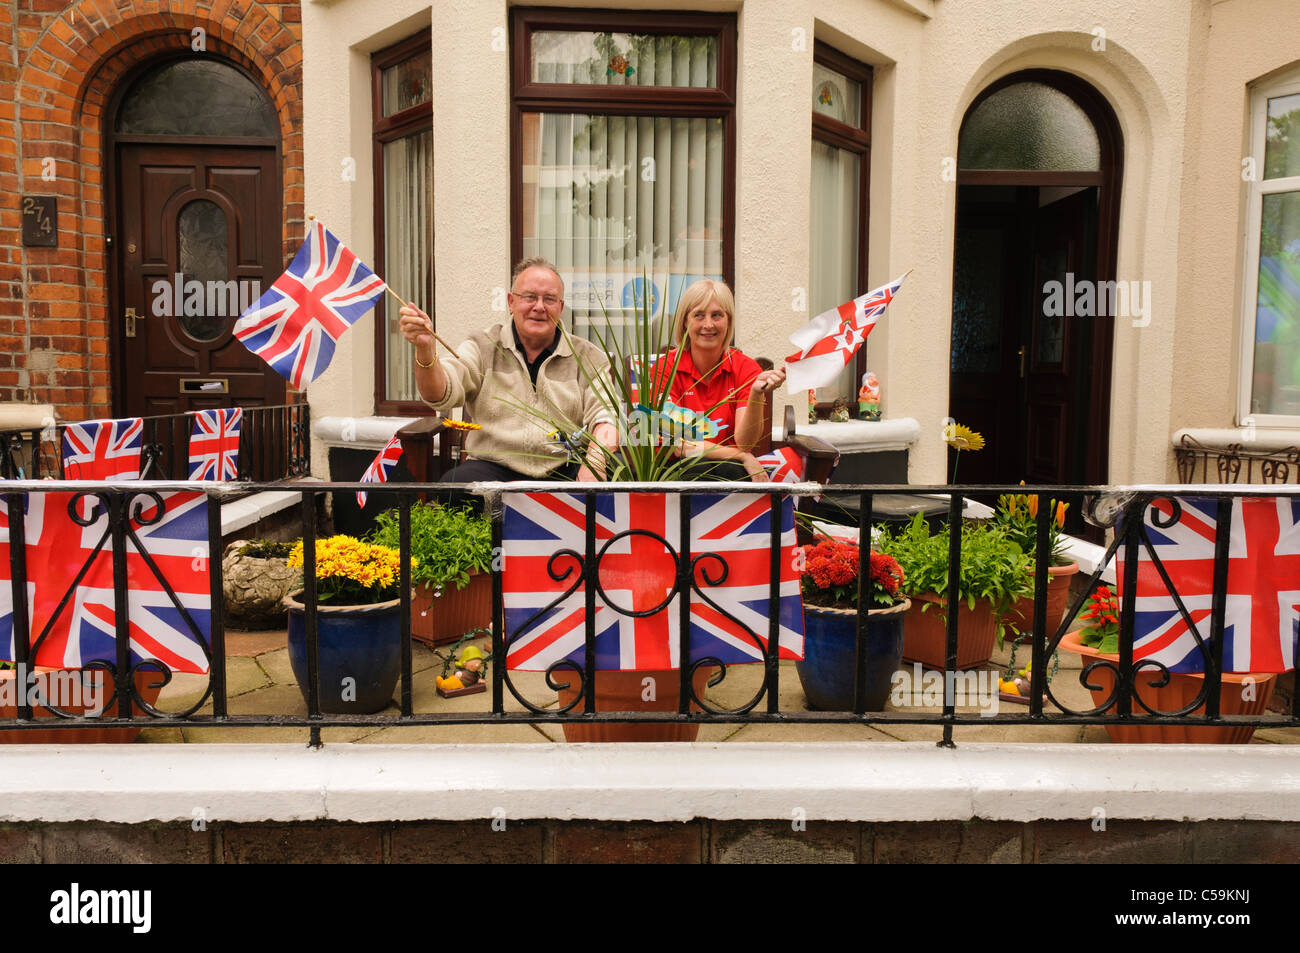 Two people waving flags in a garden decorated with Union Jacks at a street party Stock Photo